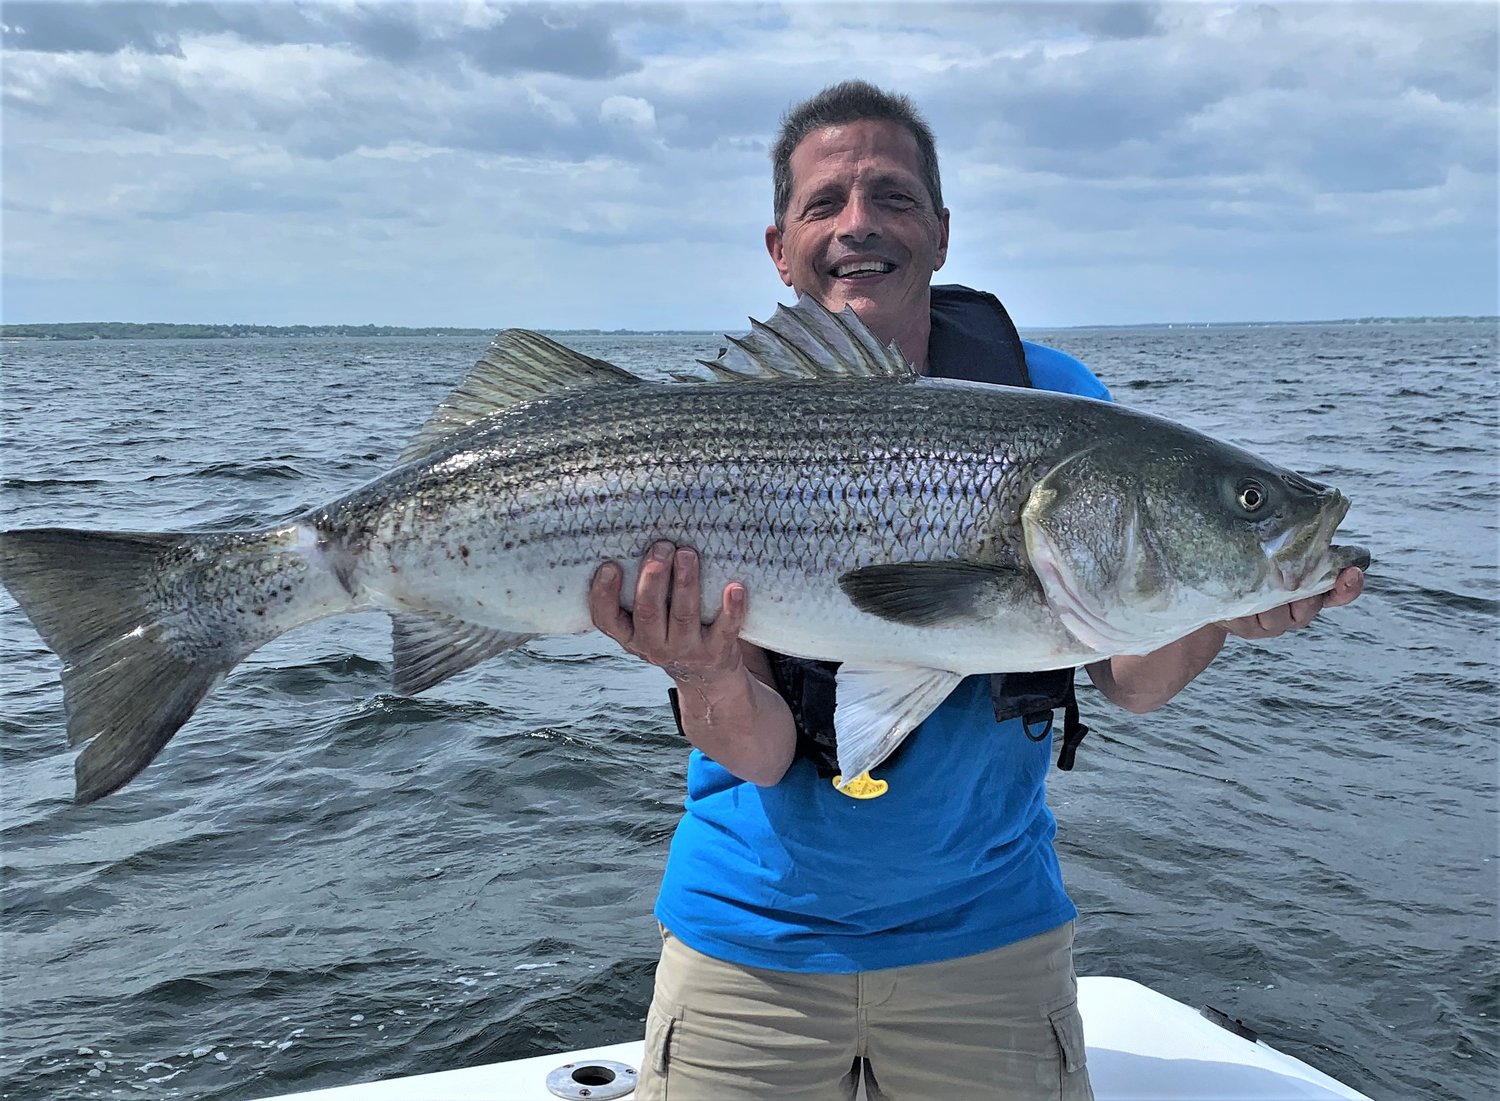 Big bass bite: Paul Criscione of Cranston, RI with the 44”, 35 pound striped bass he caught with Doug and Carol LaFrance live lining Atlantic menhaden (pogies) off Prudence Island.